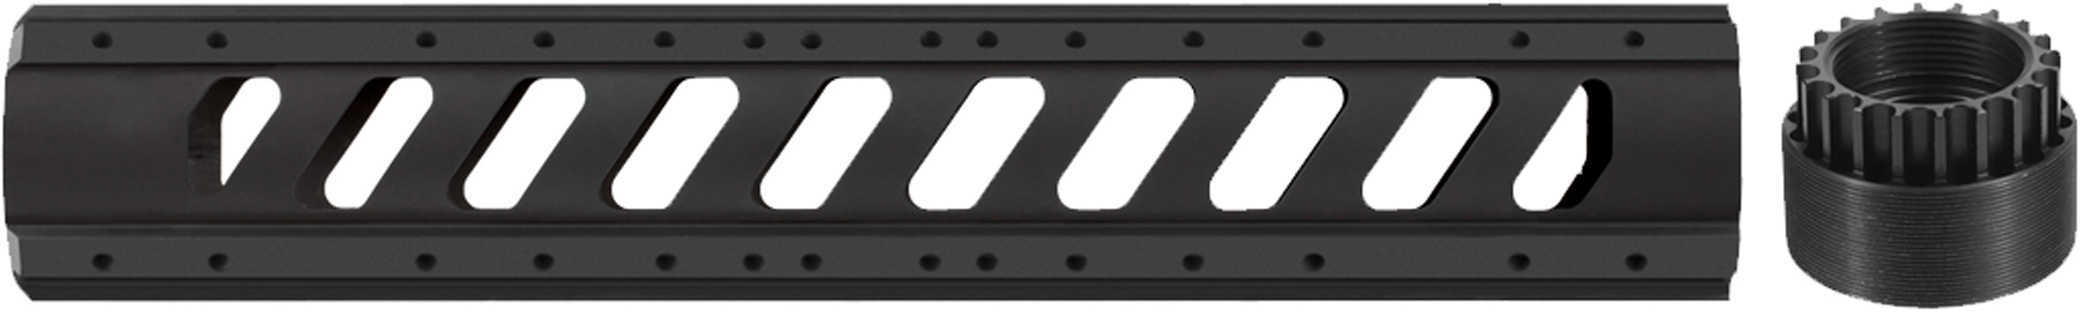 Advanced Technology Intl. AR-15 Aluminum 6 Side Rifle Length Free Float Forend w/Slotted Barrel Nut Md: A.5.10.1174